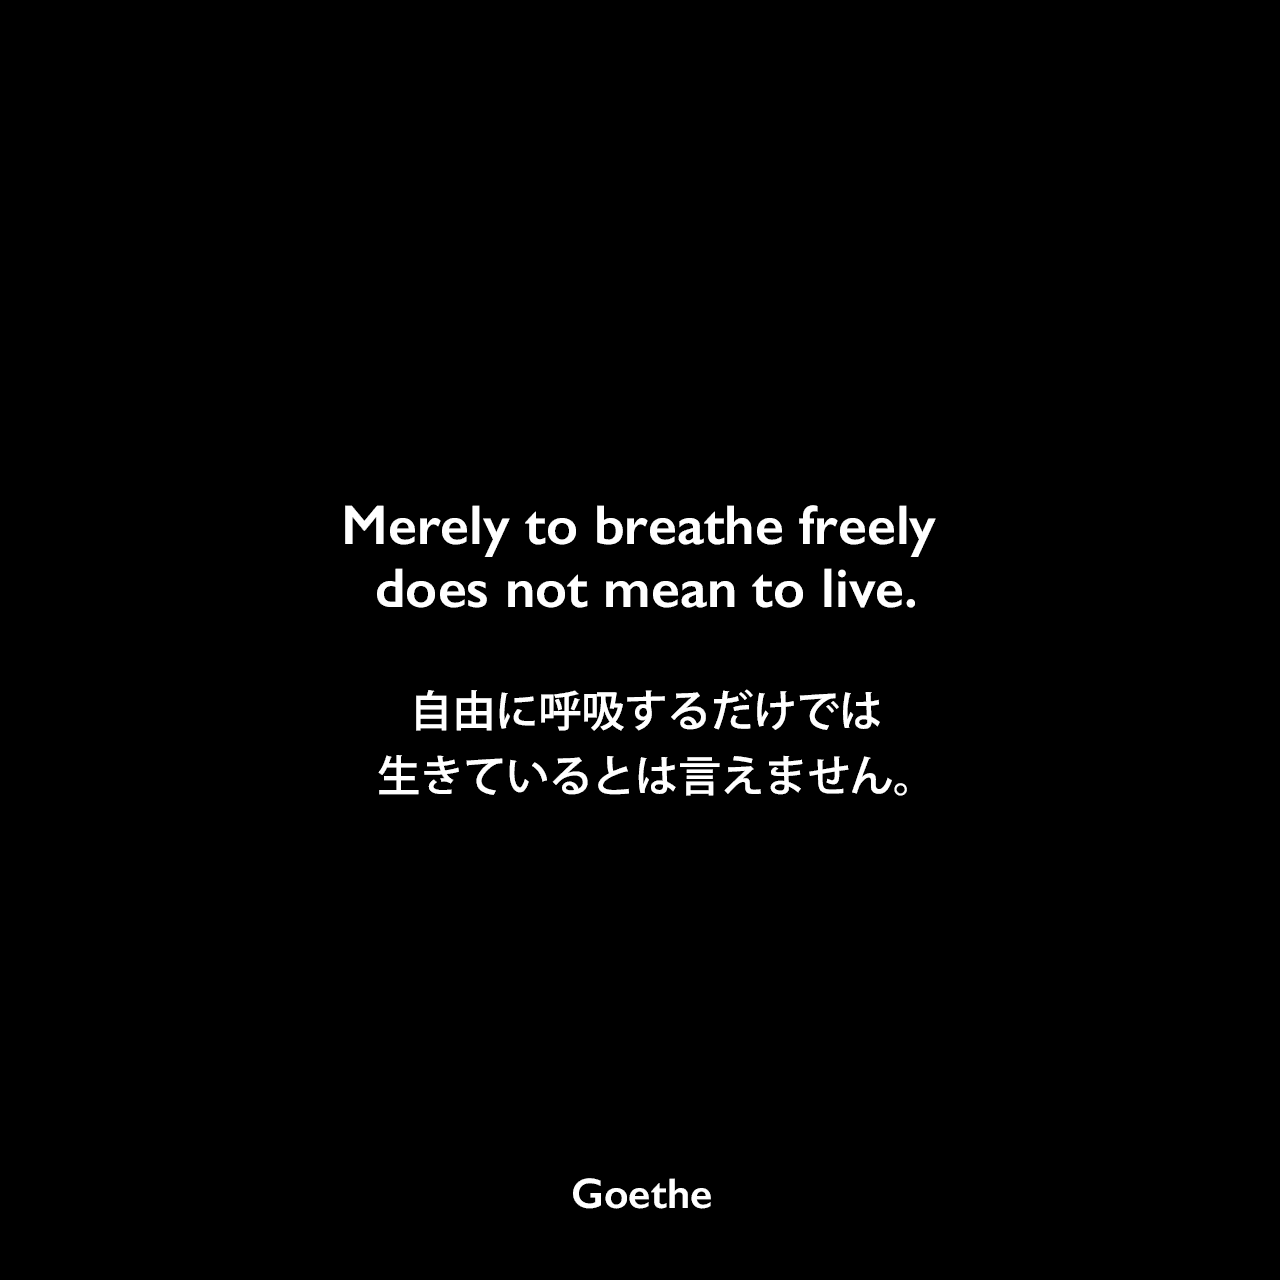 Merely to breathe freely does not mean to live.自由に呼吸するだけでは、生きているとは言えません。Johann Wolfgang von Goethe